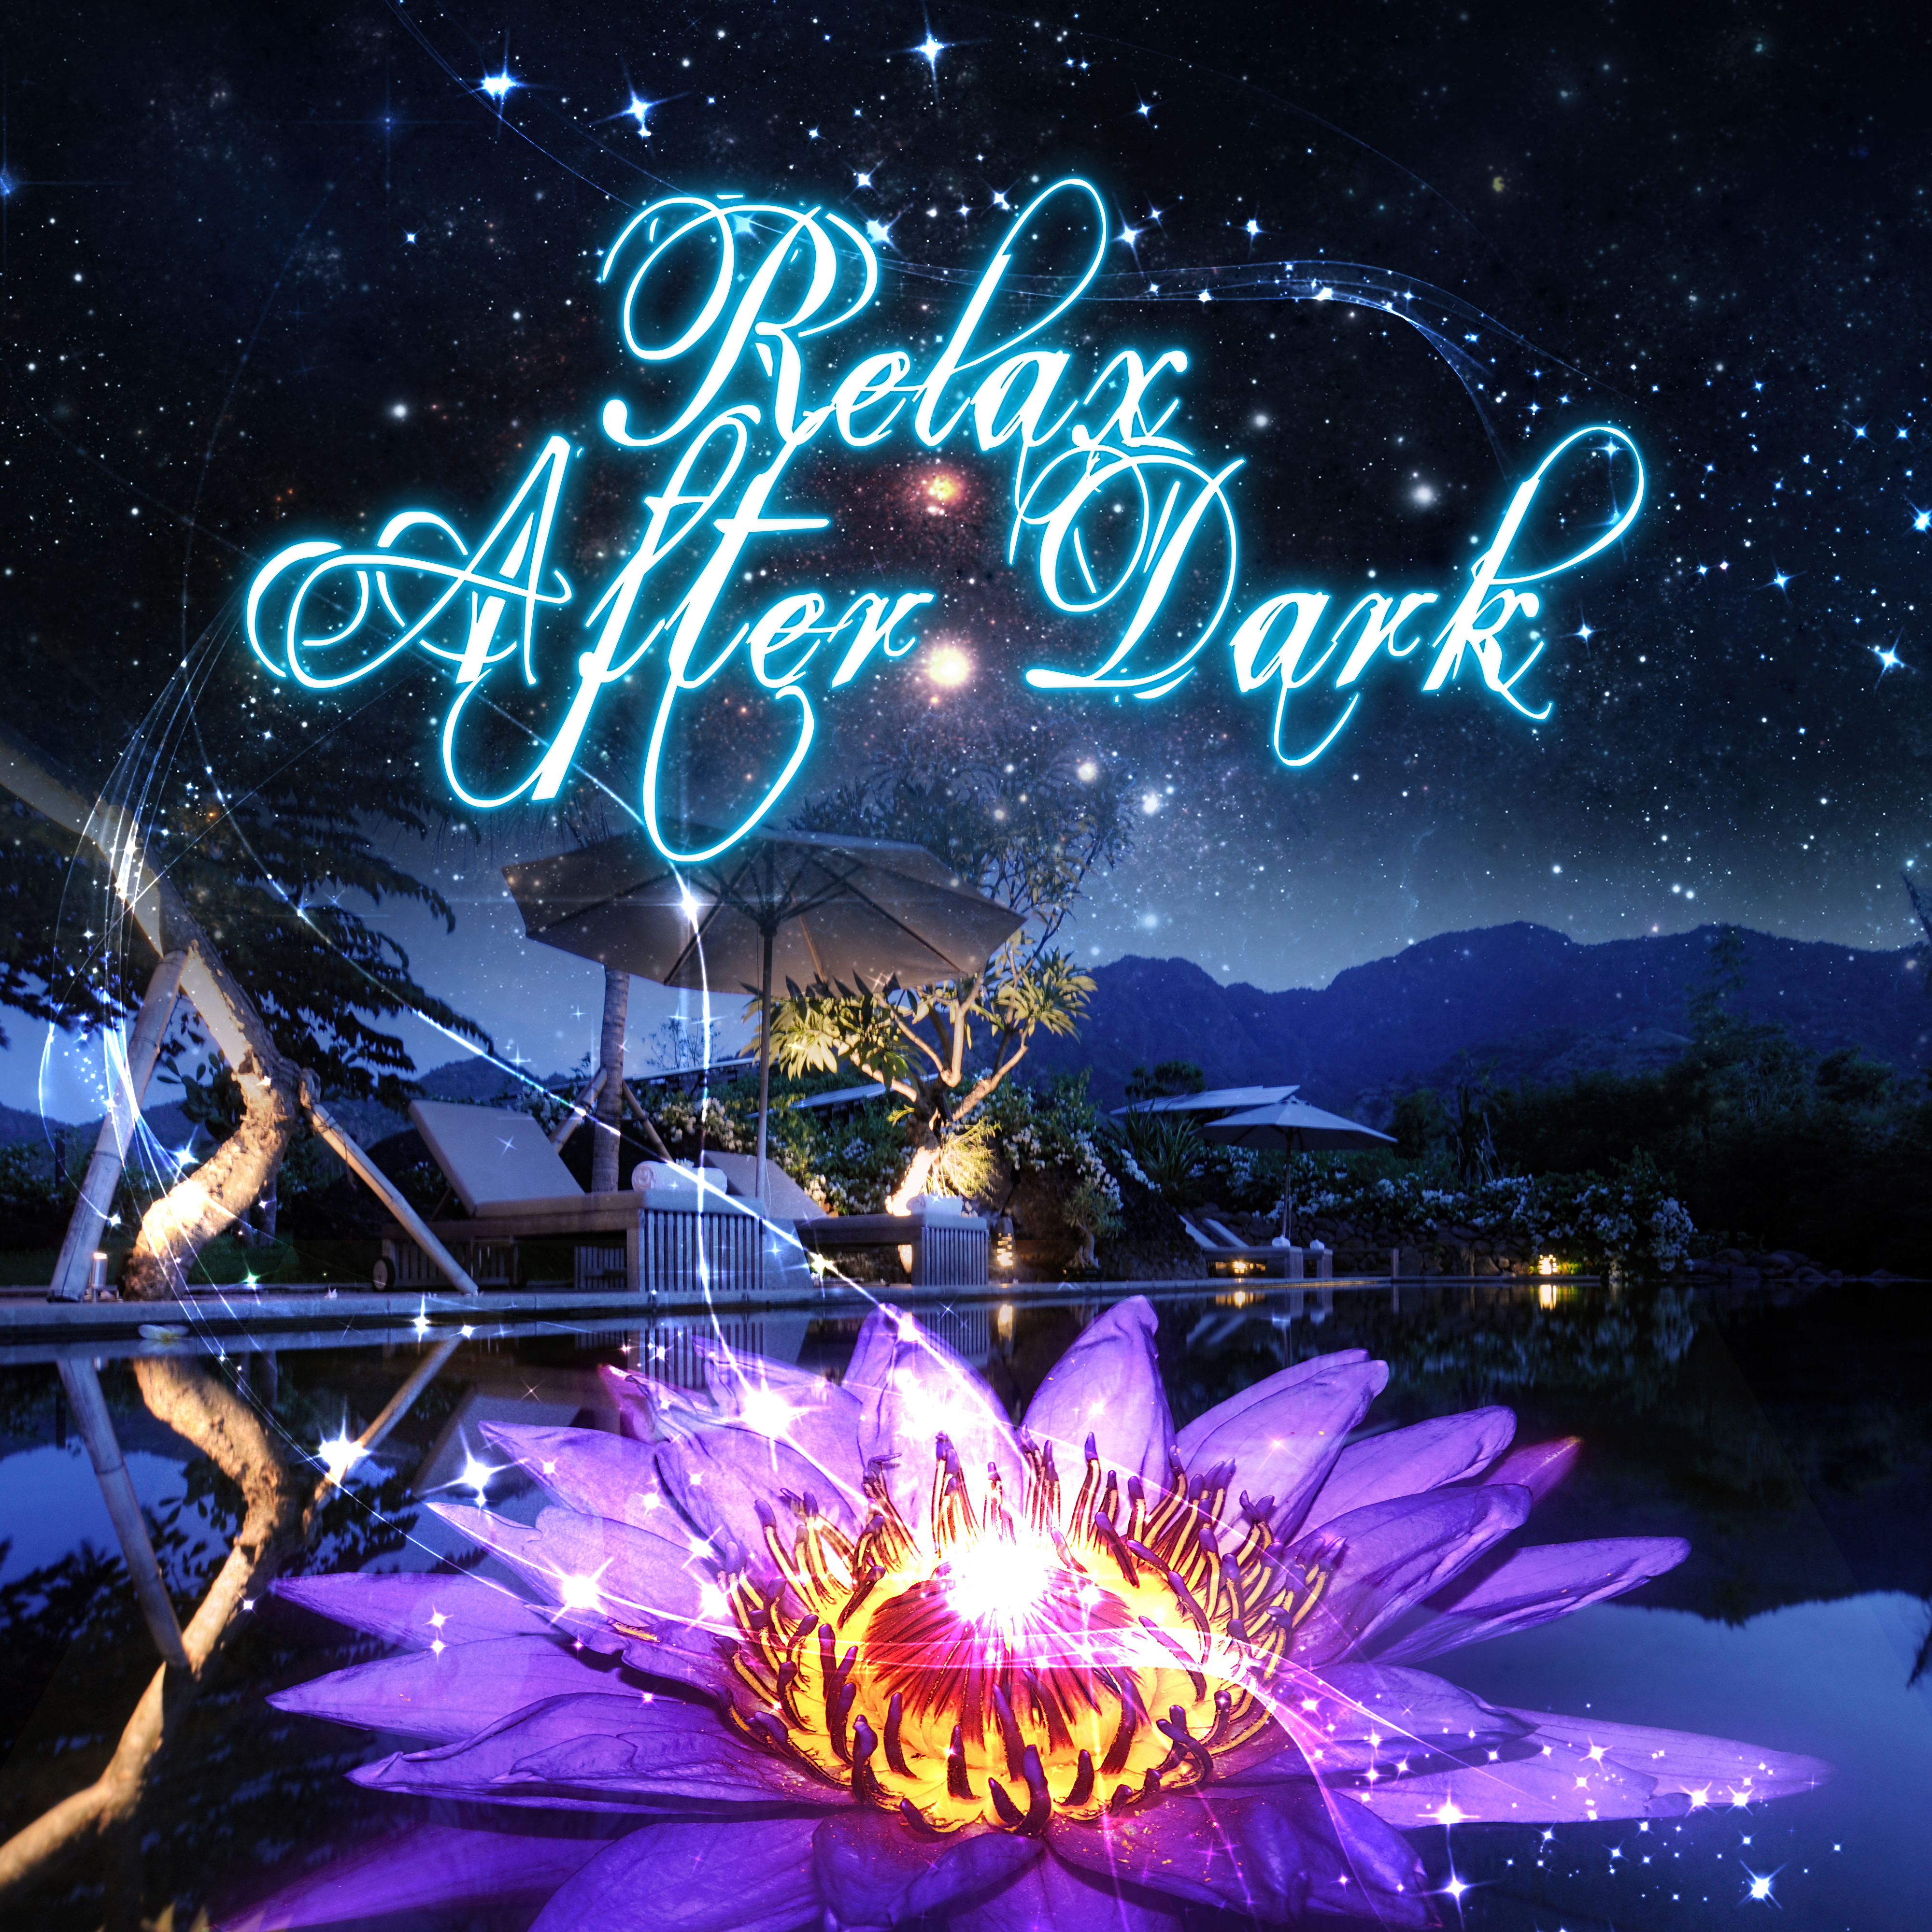 Relax After Dark  Smooth Piano Music to Calm Down  Chill Out, Massage Music for Relaxation, Stress Relief, Natural Remedies for Anxiety, Find Serenity and Asylum, Tranquility in Home SPA